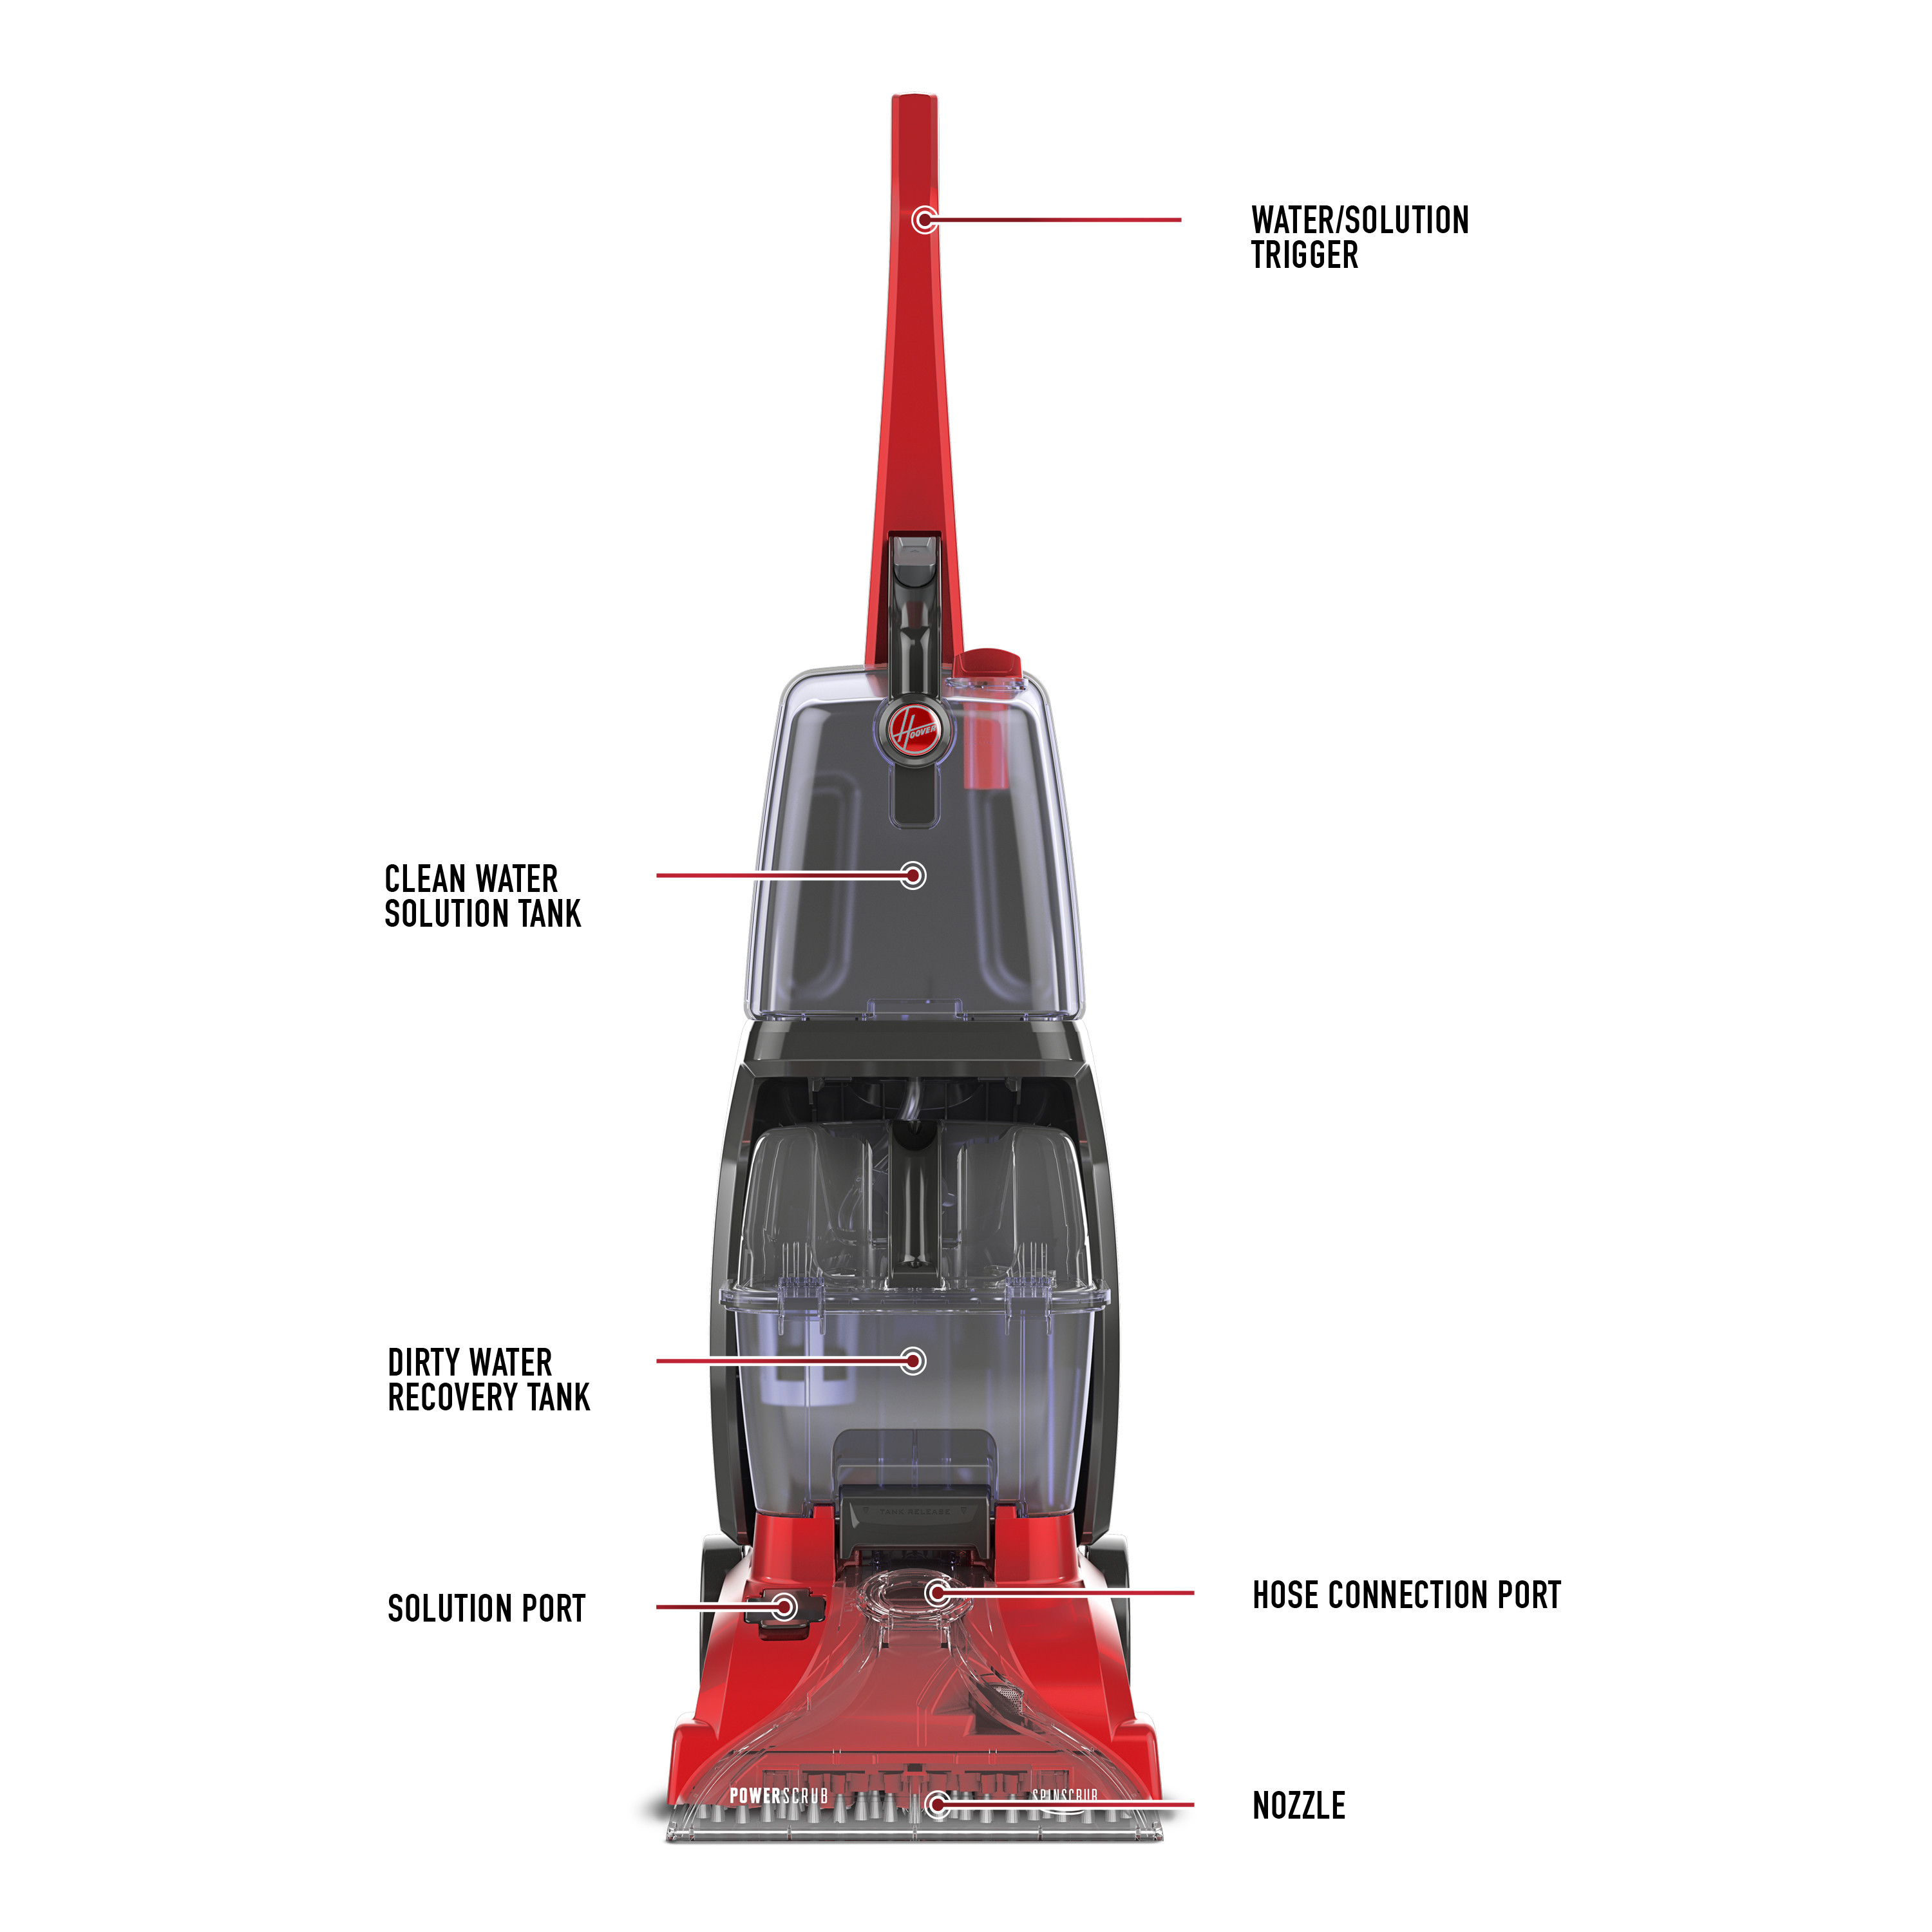 21 Famous Hardwood Floor Cleaners Consumer Reviews 2024 free download hardwood floor cleaners consumer reviews of hoover power scrub carpet cleaner w spinscrub technology fh50135 regarding hoover power scrub carpet cleaner w spinscrub technology fh50135 walmar